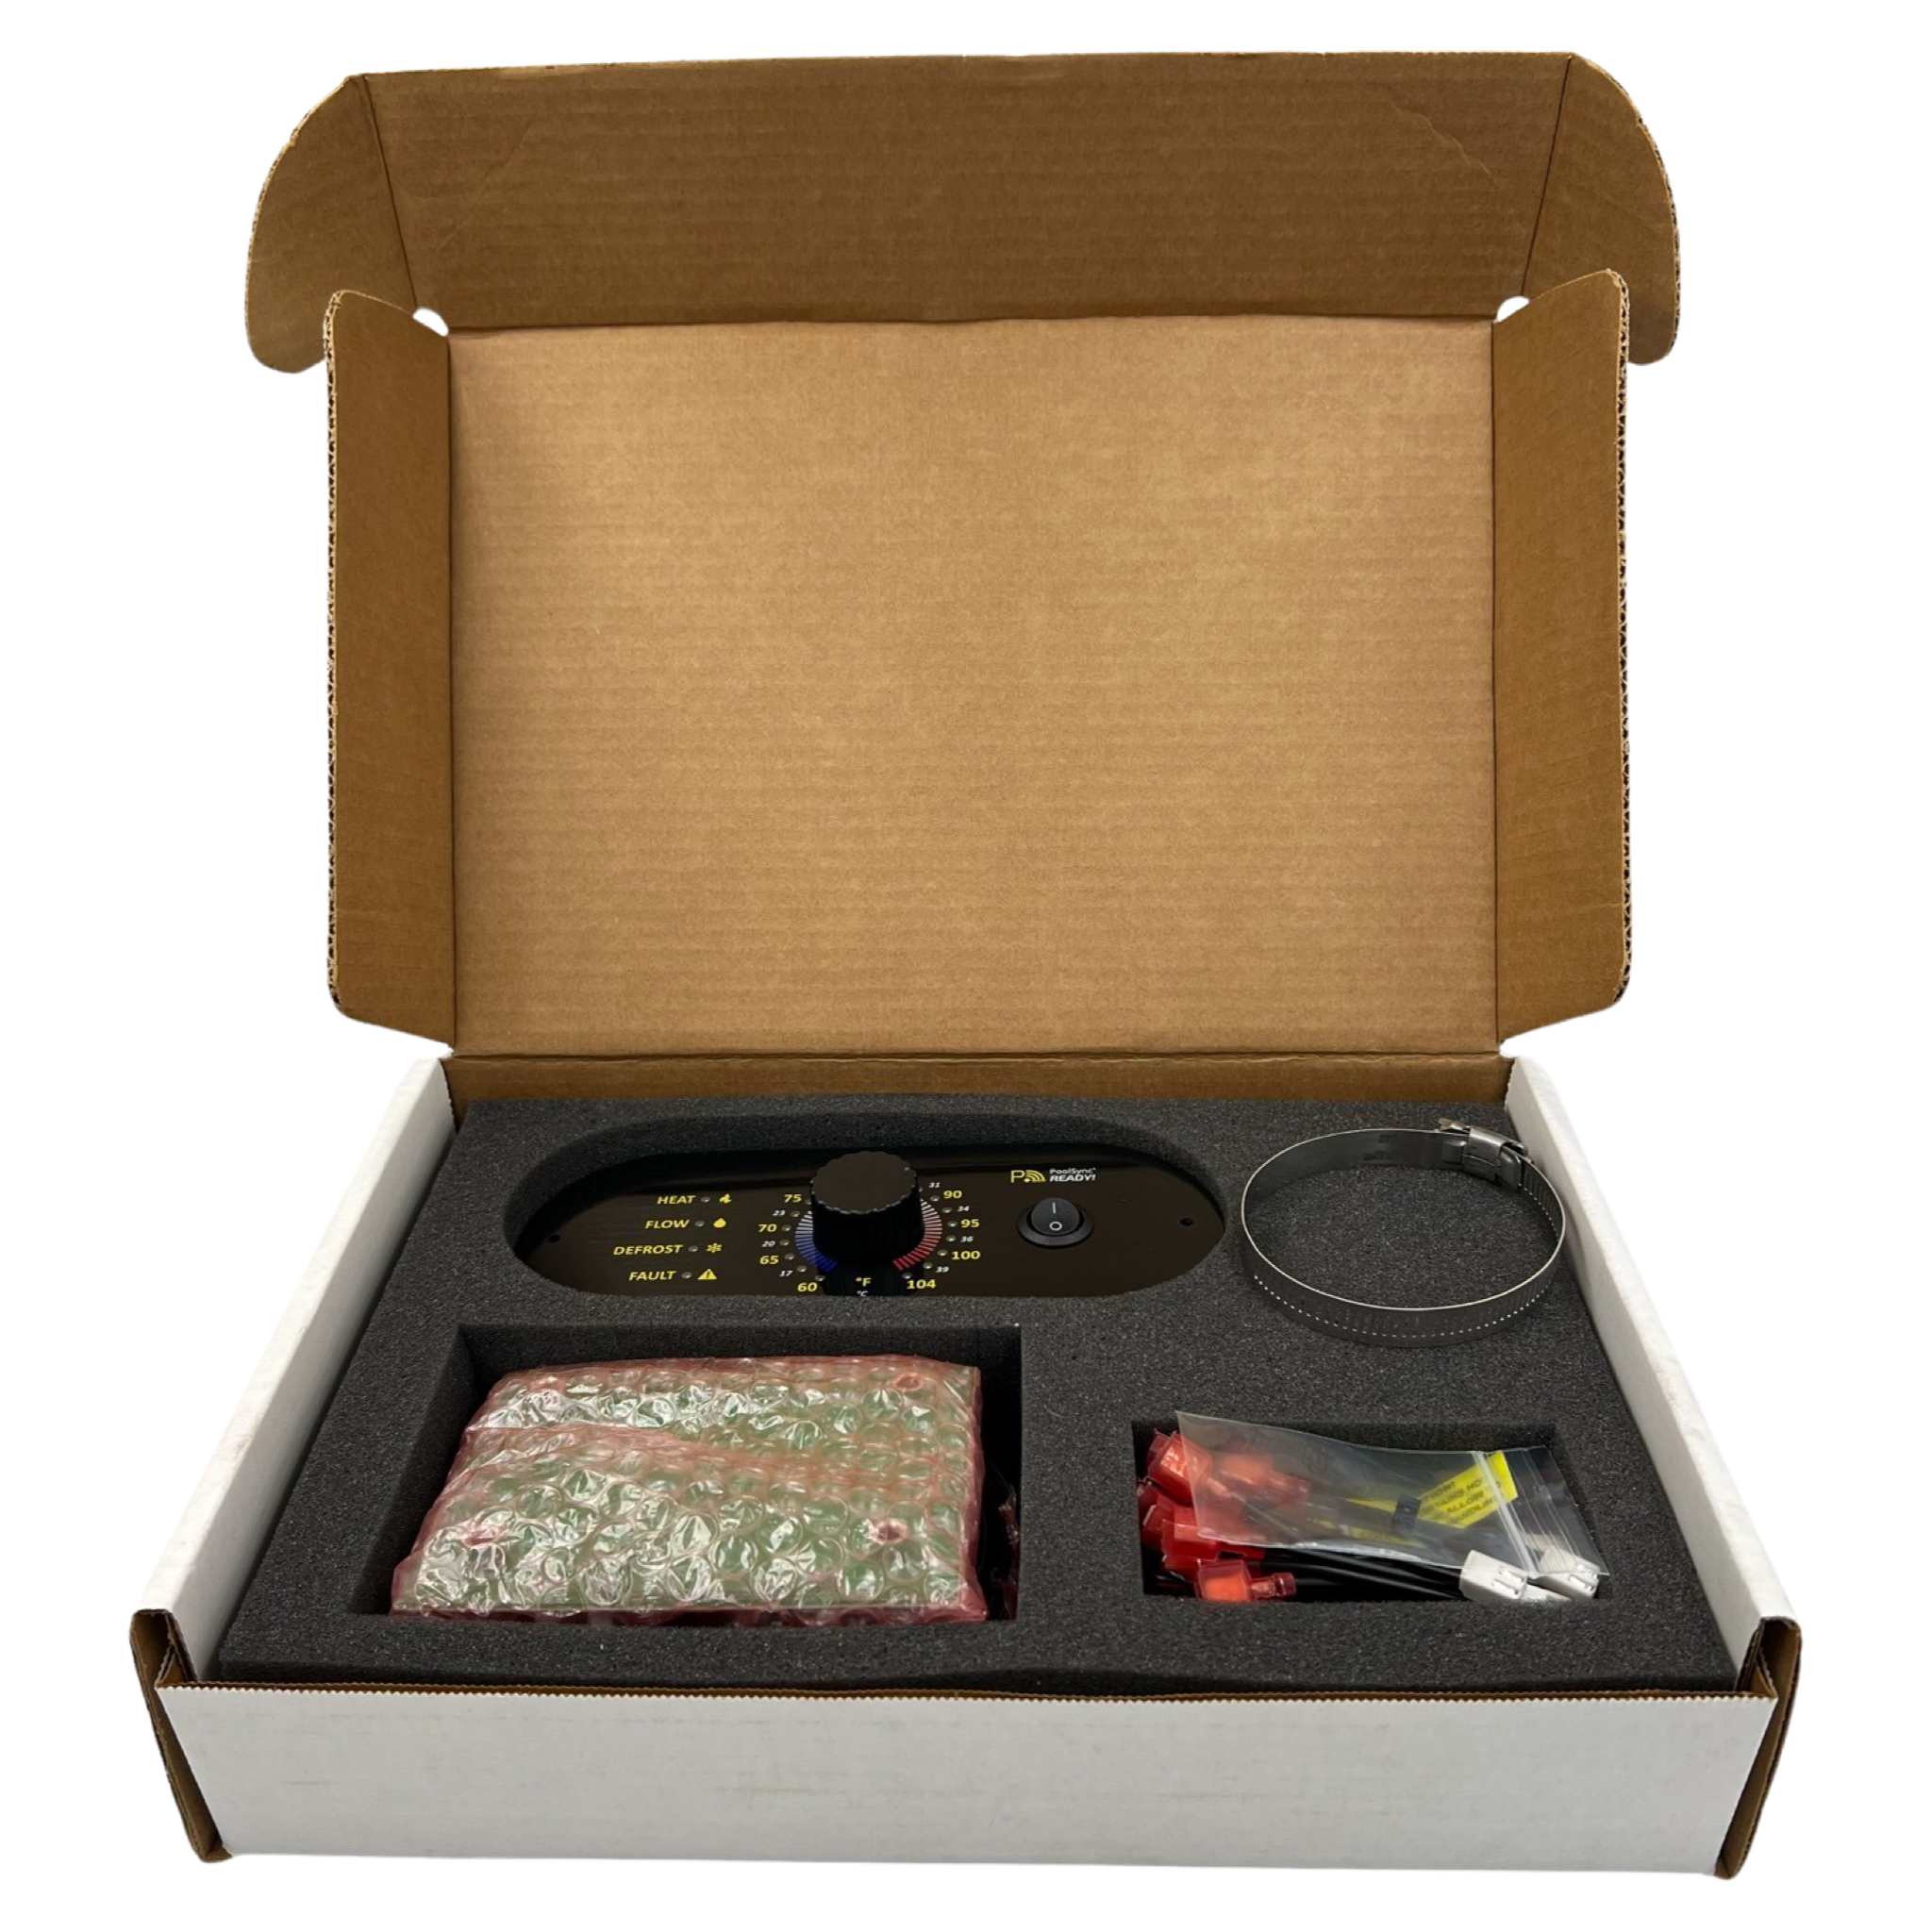 AquaCal STK0253 HP10 Upgrade Kit, for Heat Only Heat Pumps